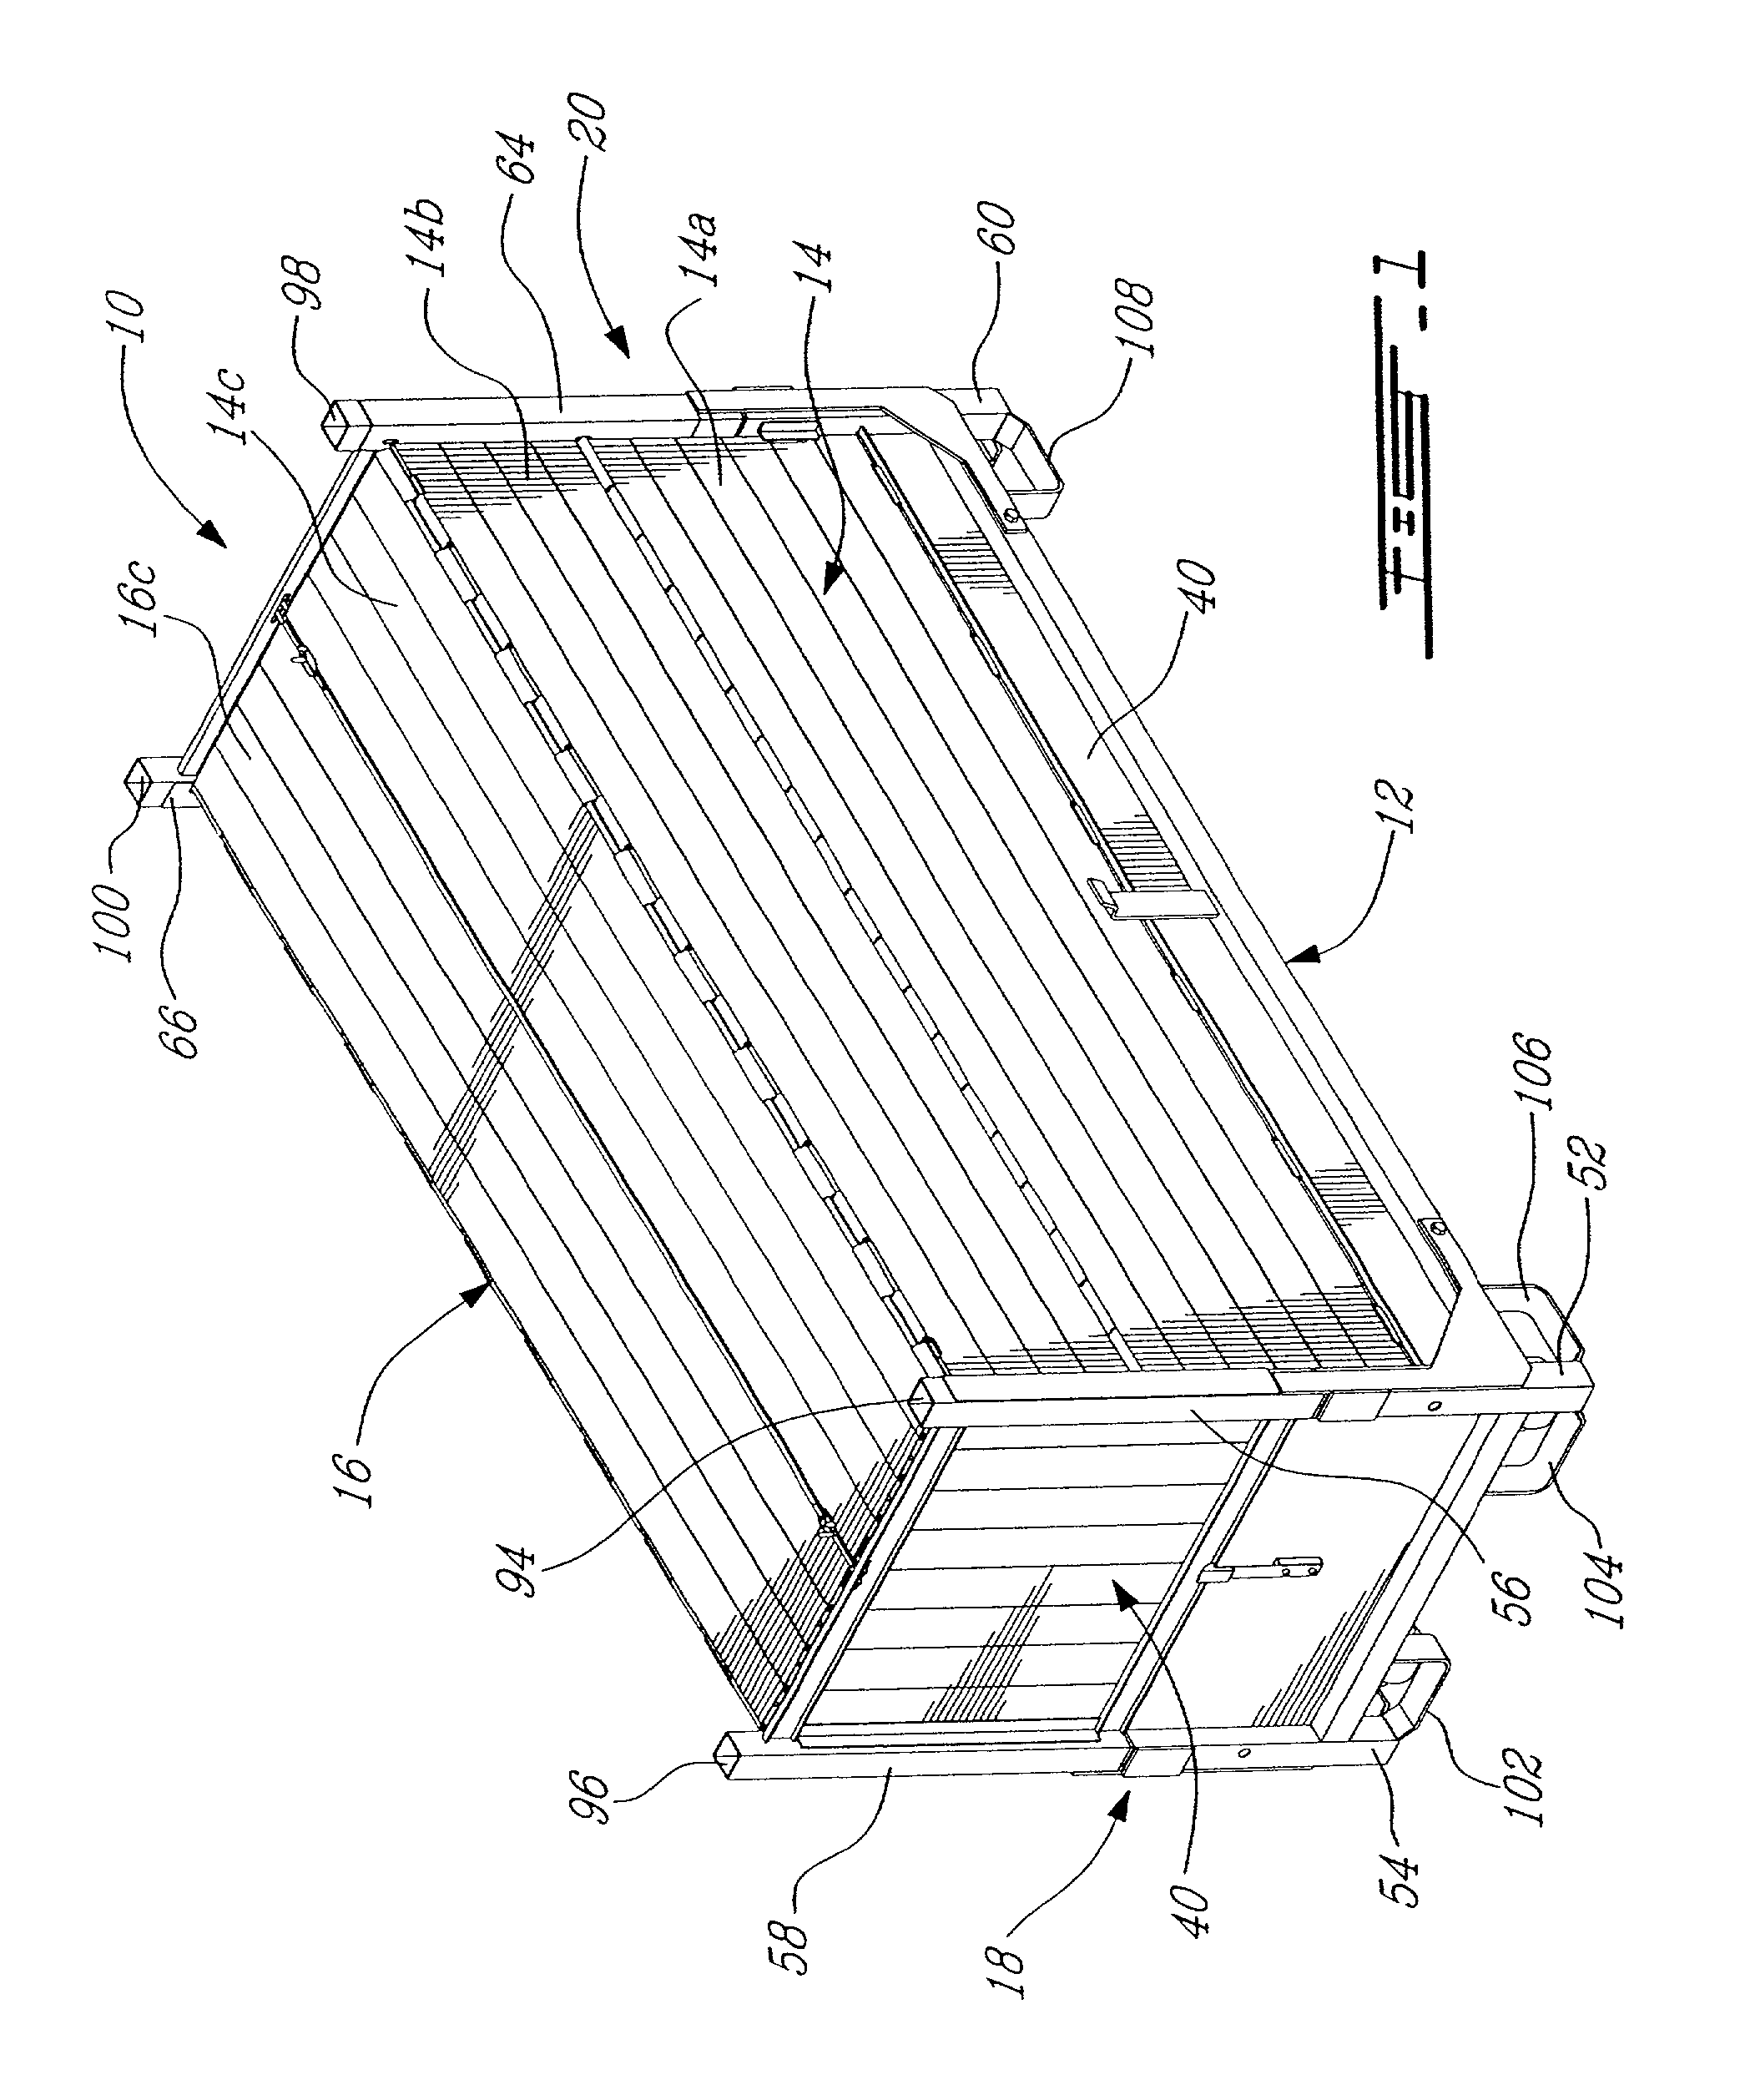 Crate for carrying glass panels